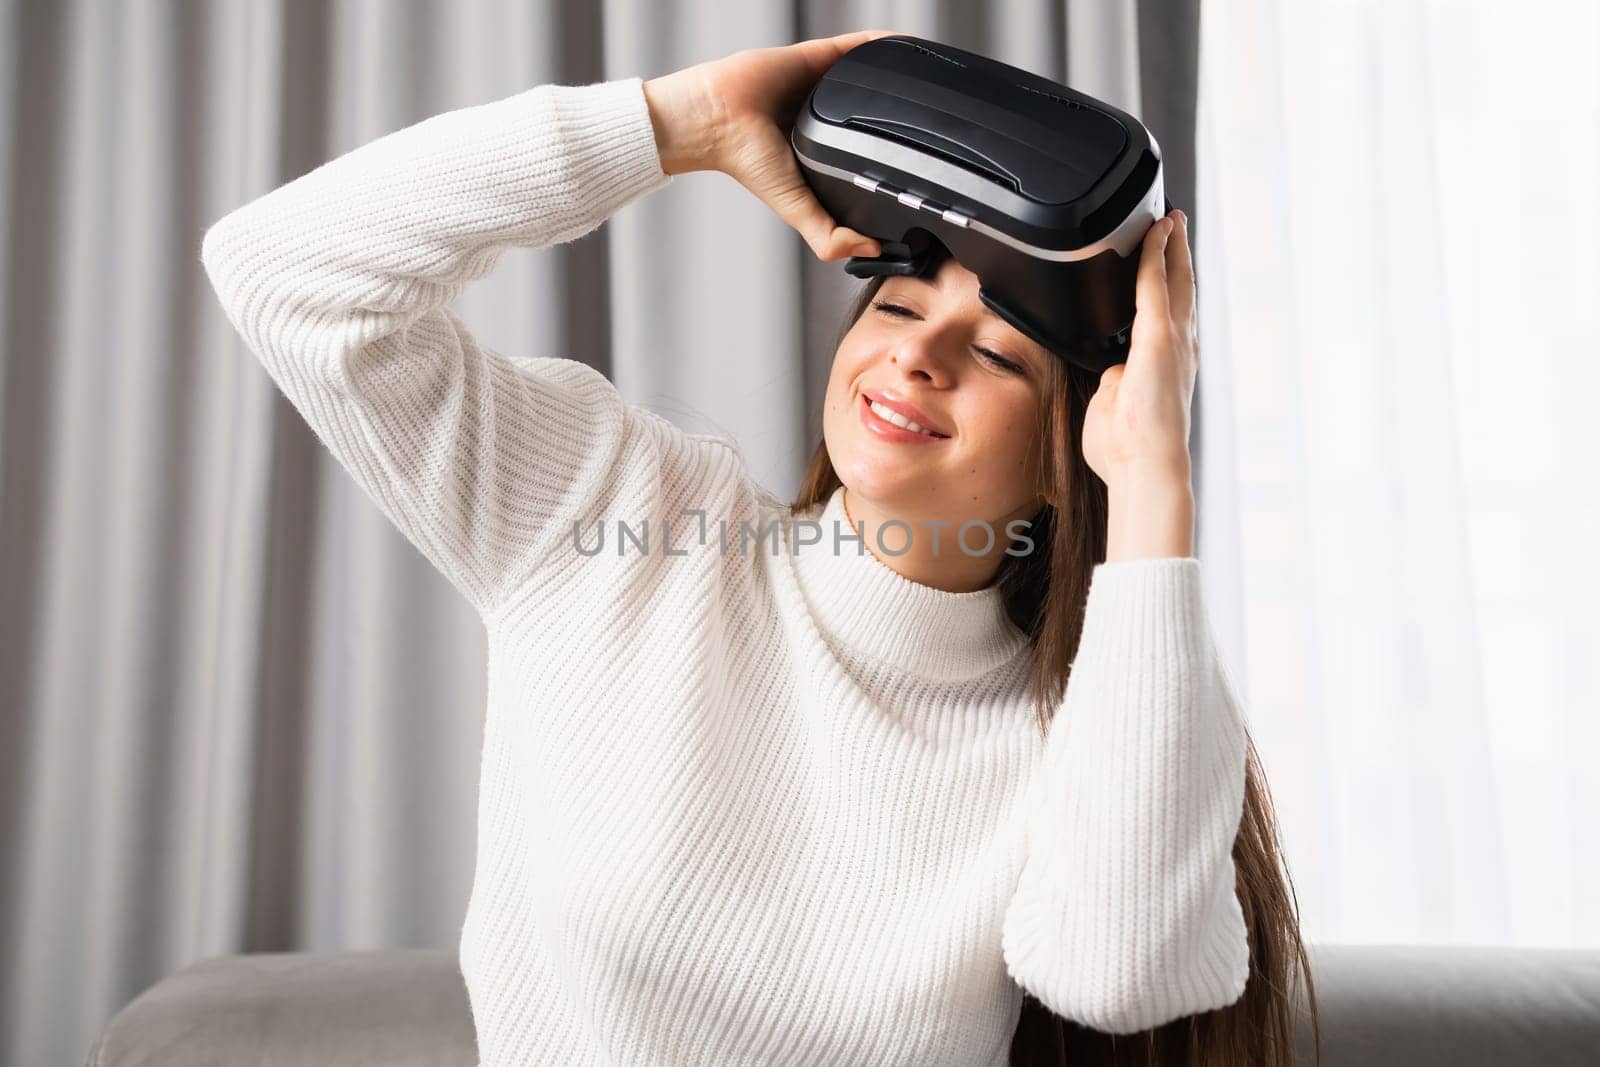 Portrait of a smiling woman putting on VR goggles for playing games in cyber space.